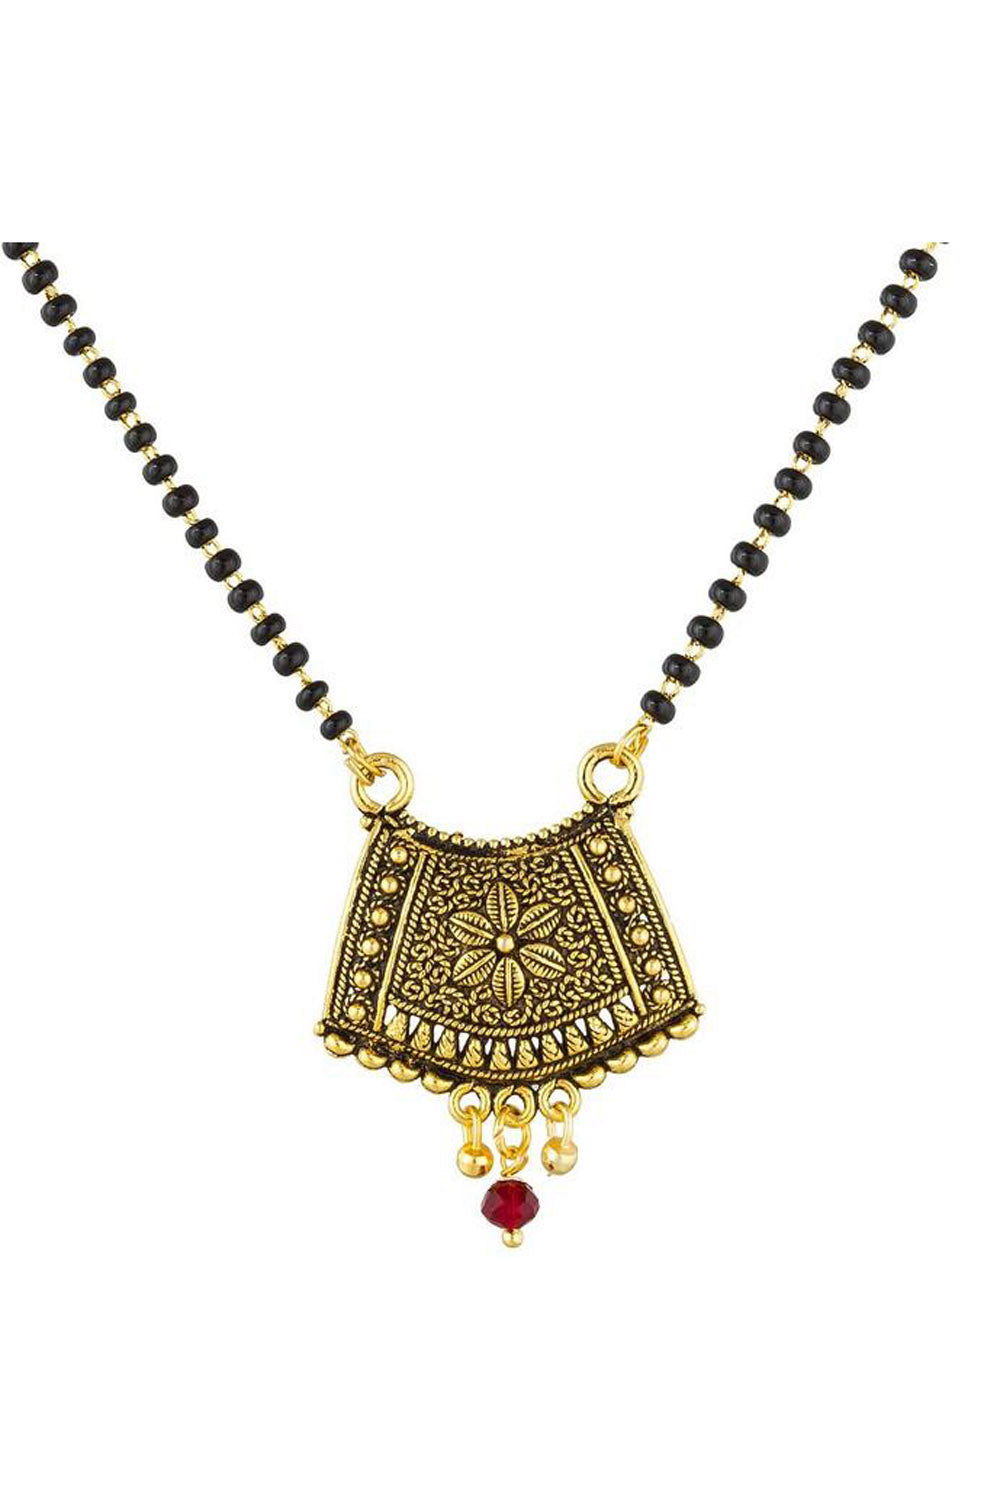 Women's Alloy Mangalsutra in Black and Gold